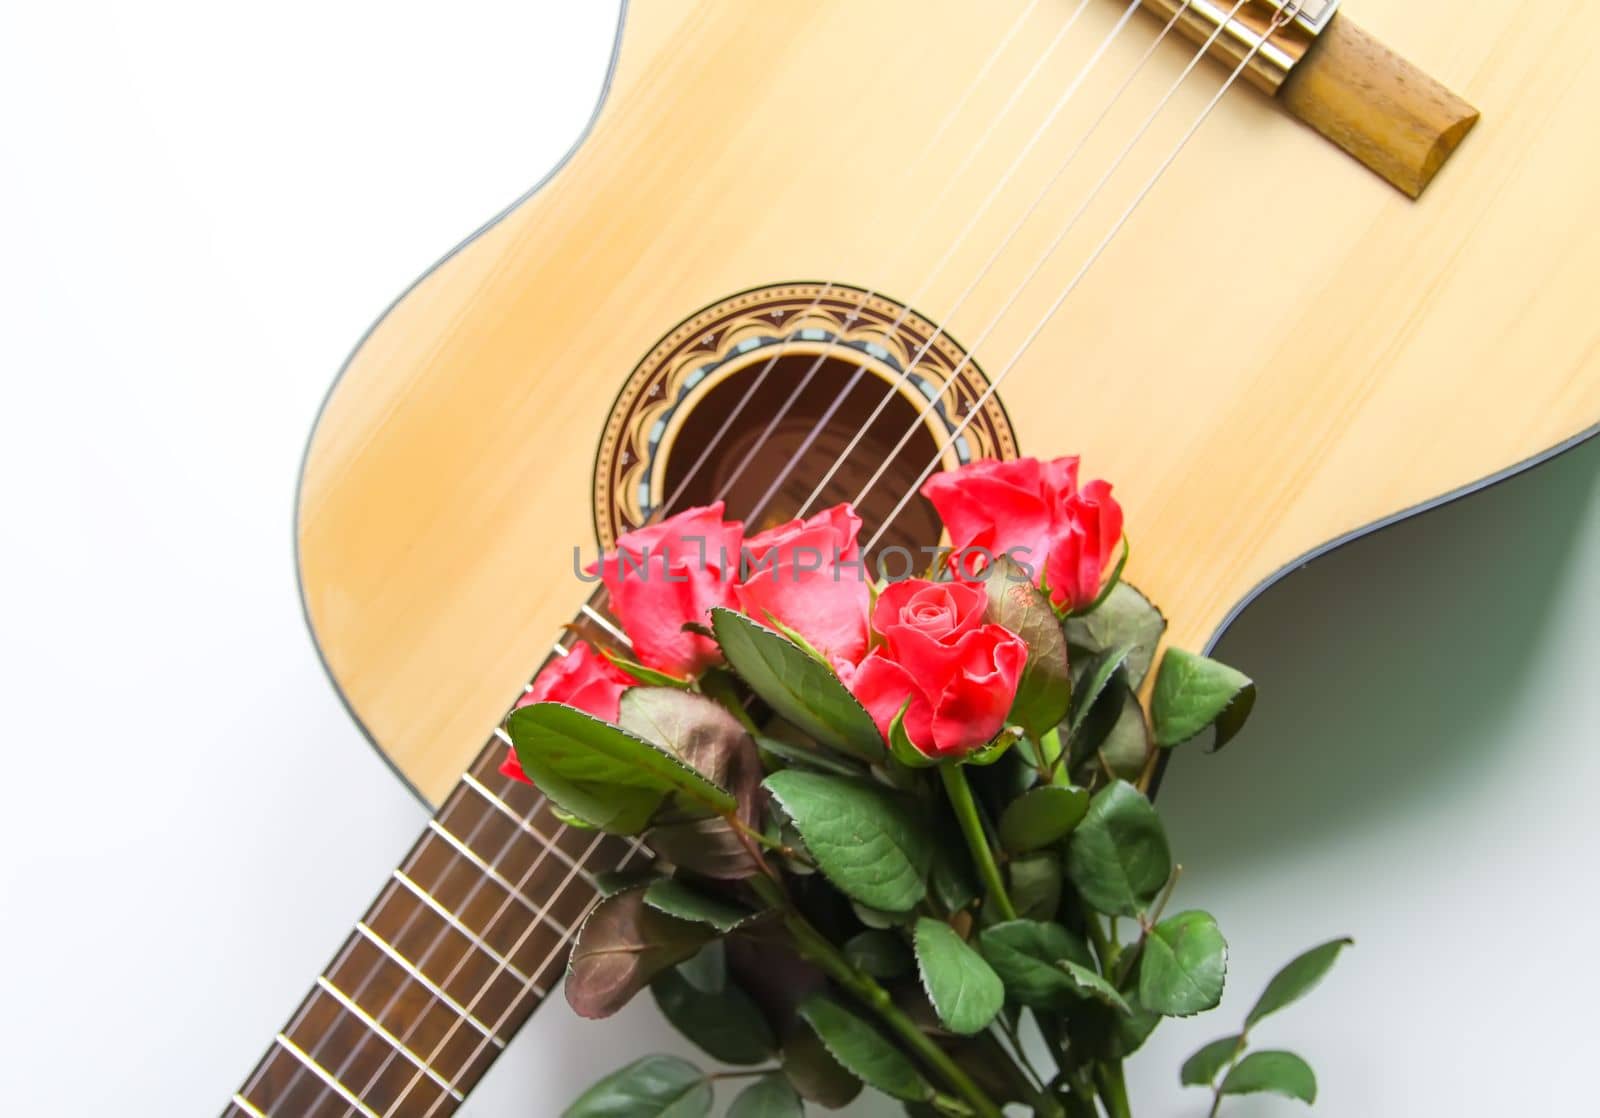 Classic guitar and red roses by nightlyviolet